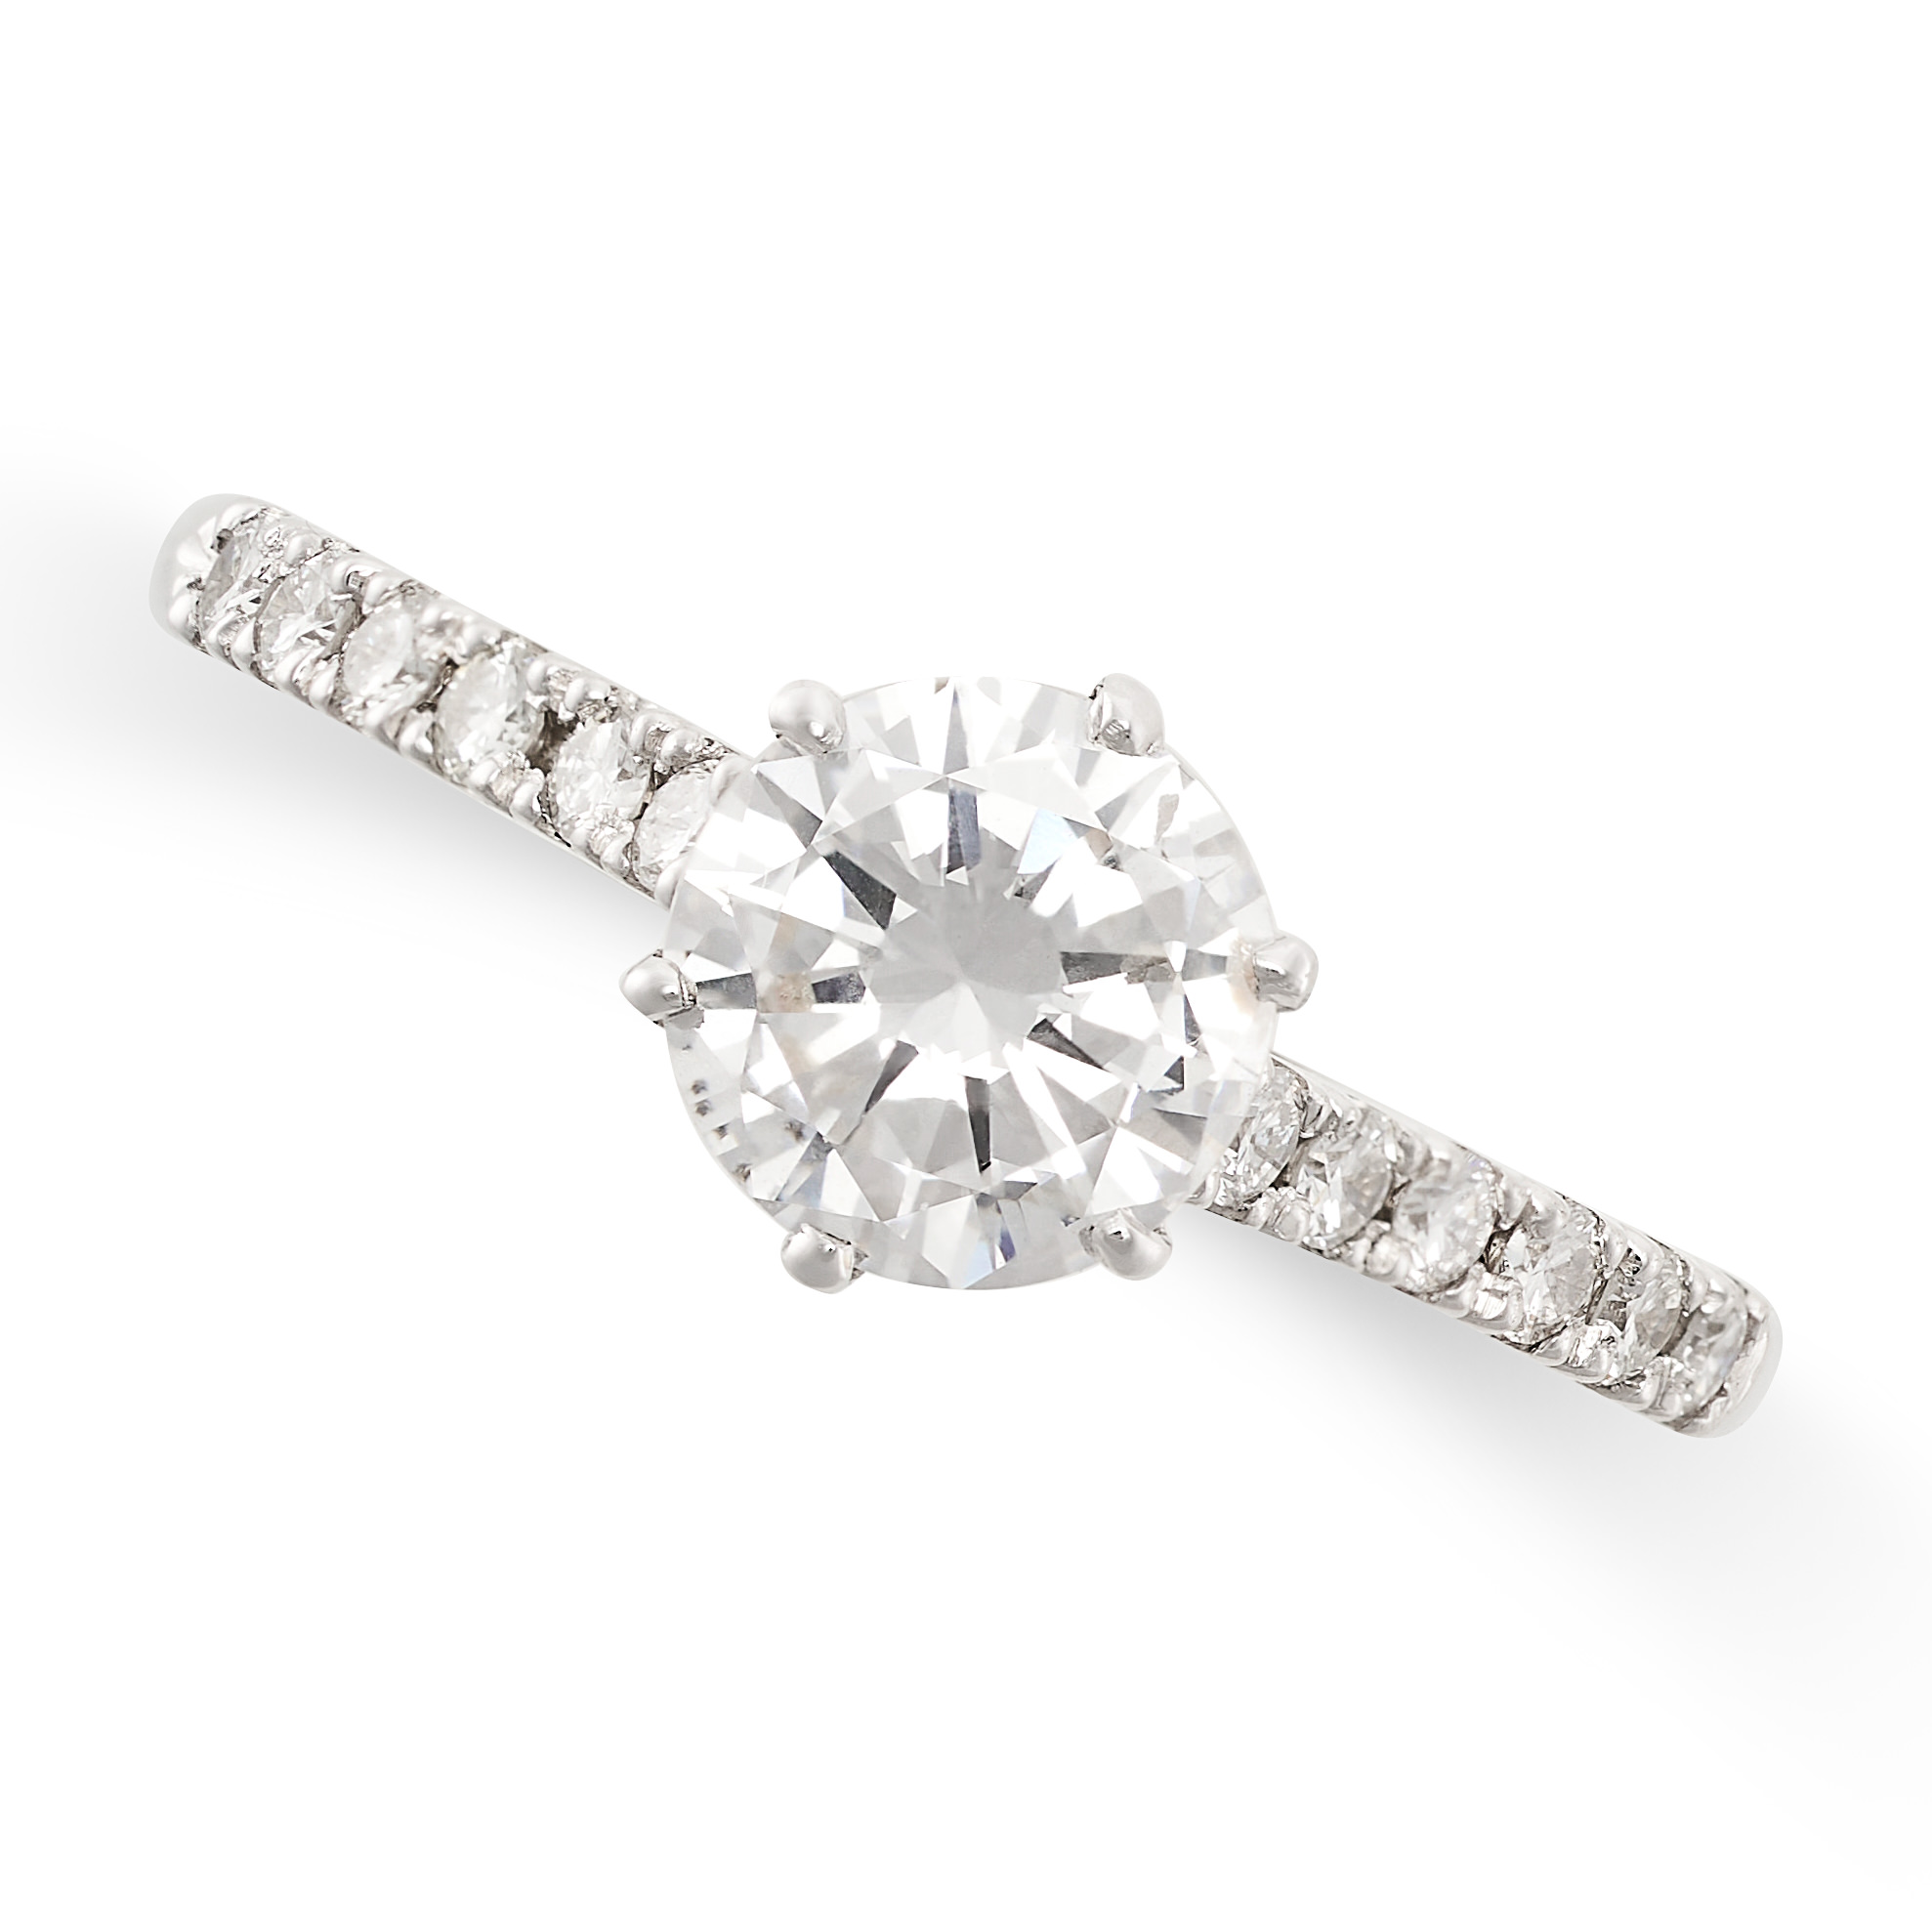 A SOLITAIRE DIAMOND ENGAGEMENT RING in 18ct white gold, set with a round brilliant cut diamond of